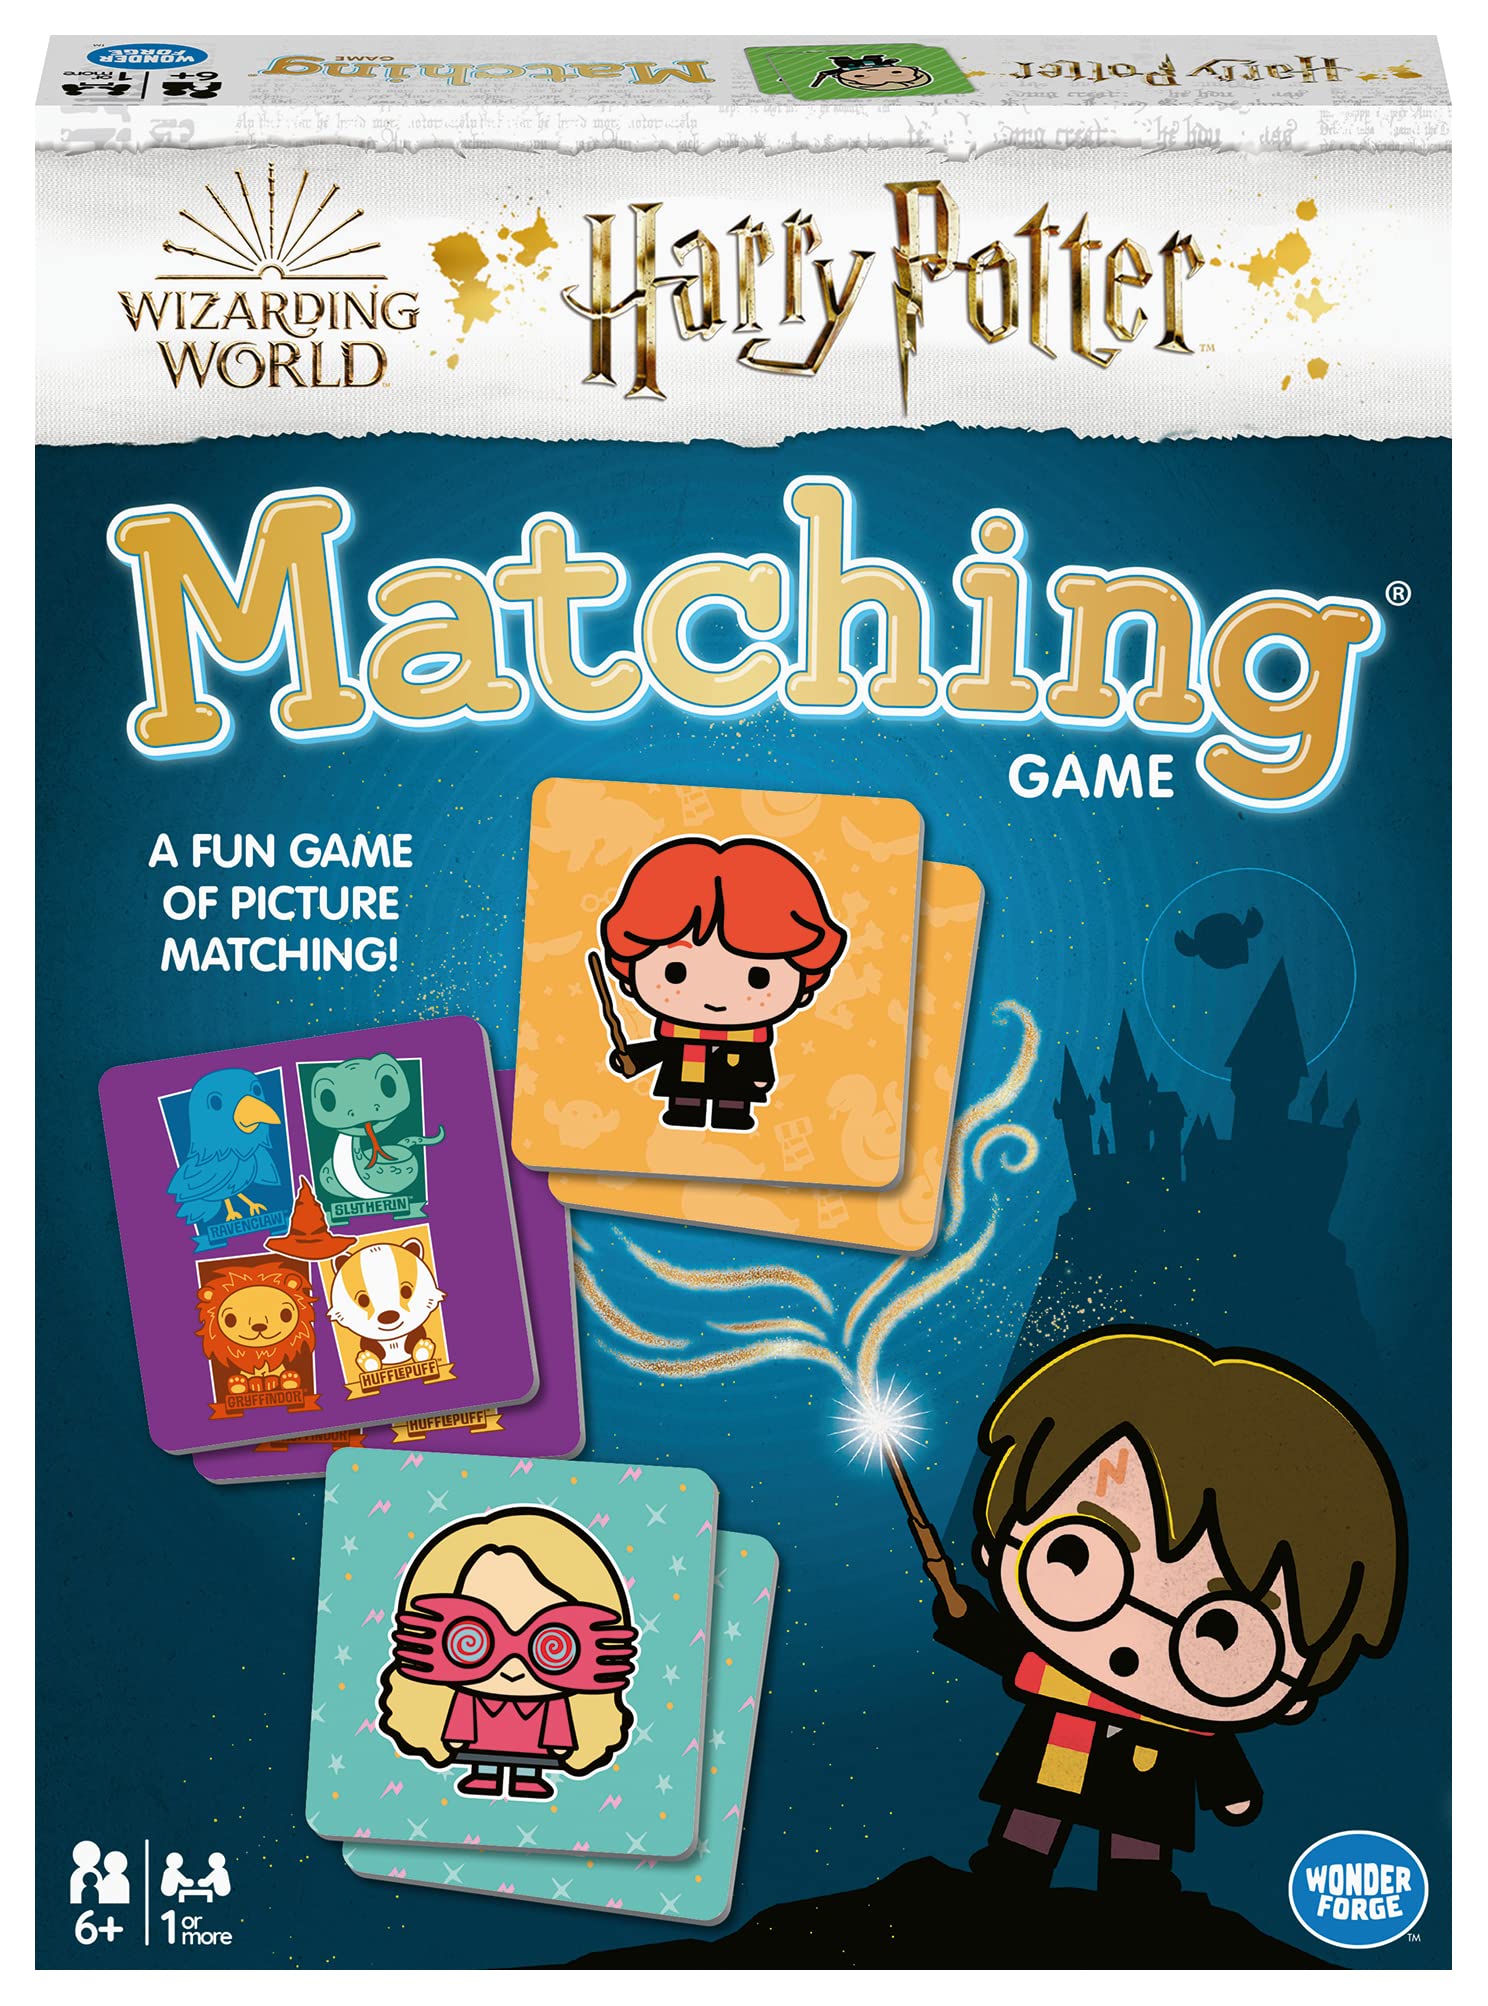 Ravensburger Wizarding World of Harry Potter Matching Game for Boys & Girls Age 3 and Up - A Fun & Fast Magical Memory Game You Can Play Over & Over